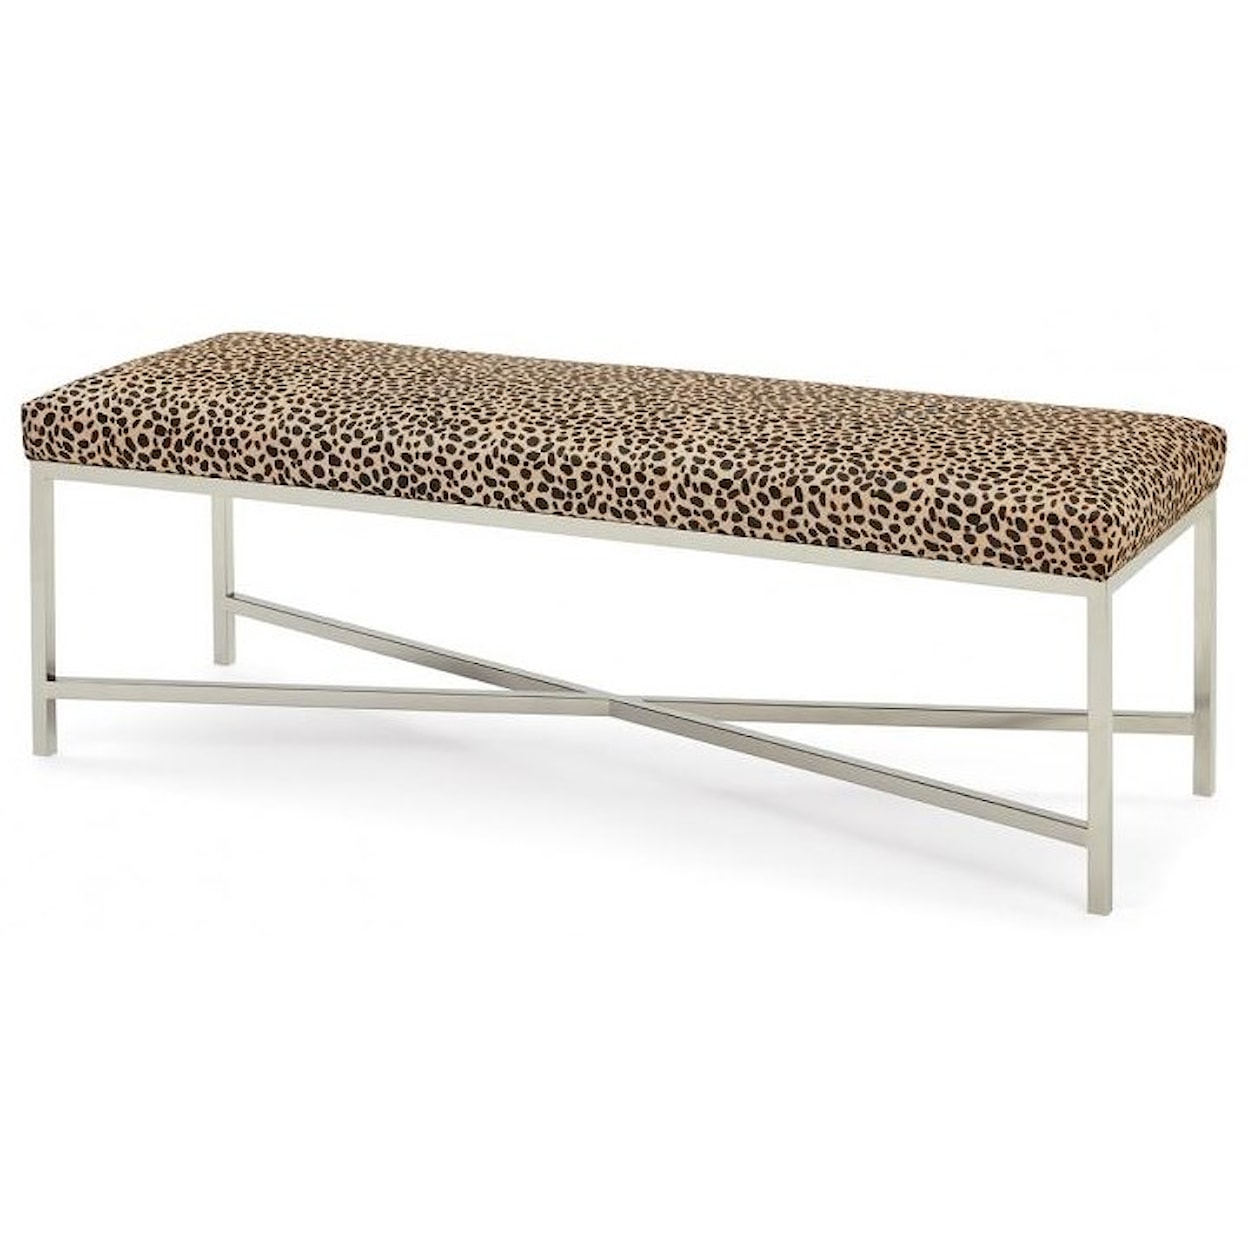 Massoud Pax Upholstered Benches